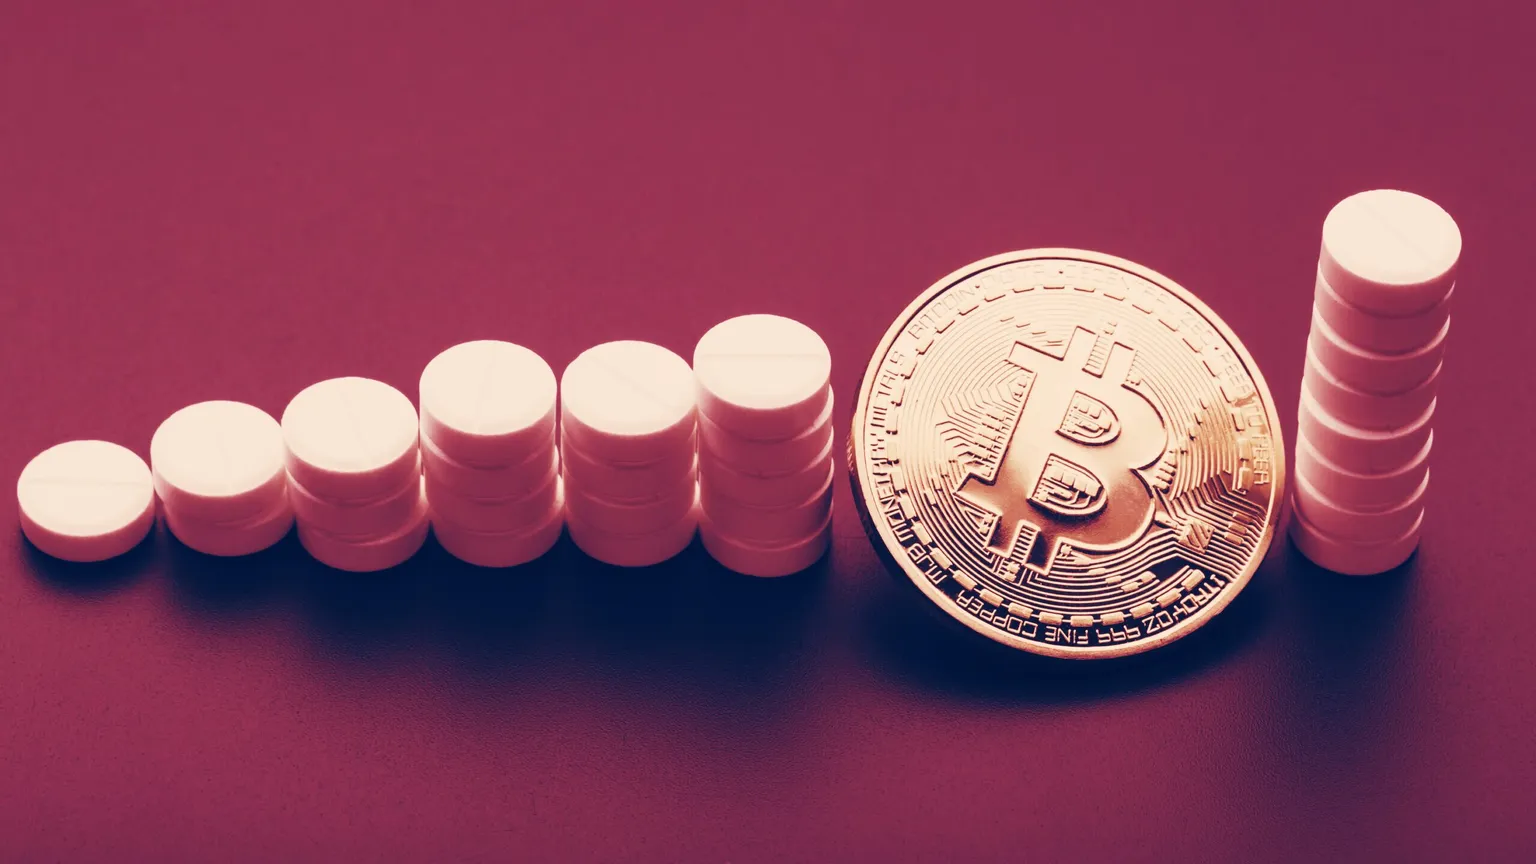 Users pay for goods on dark web marketplaces in Bitcoin. (Image: Shutterstock)